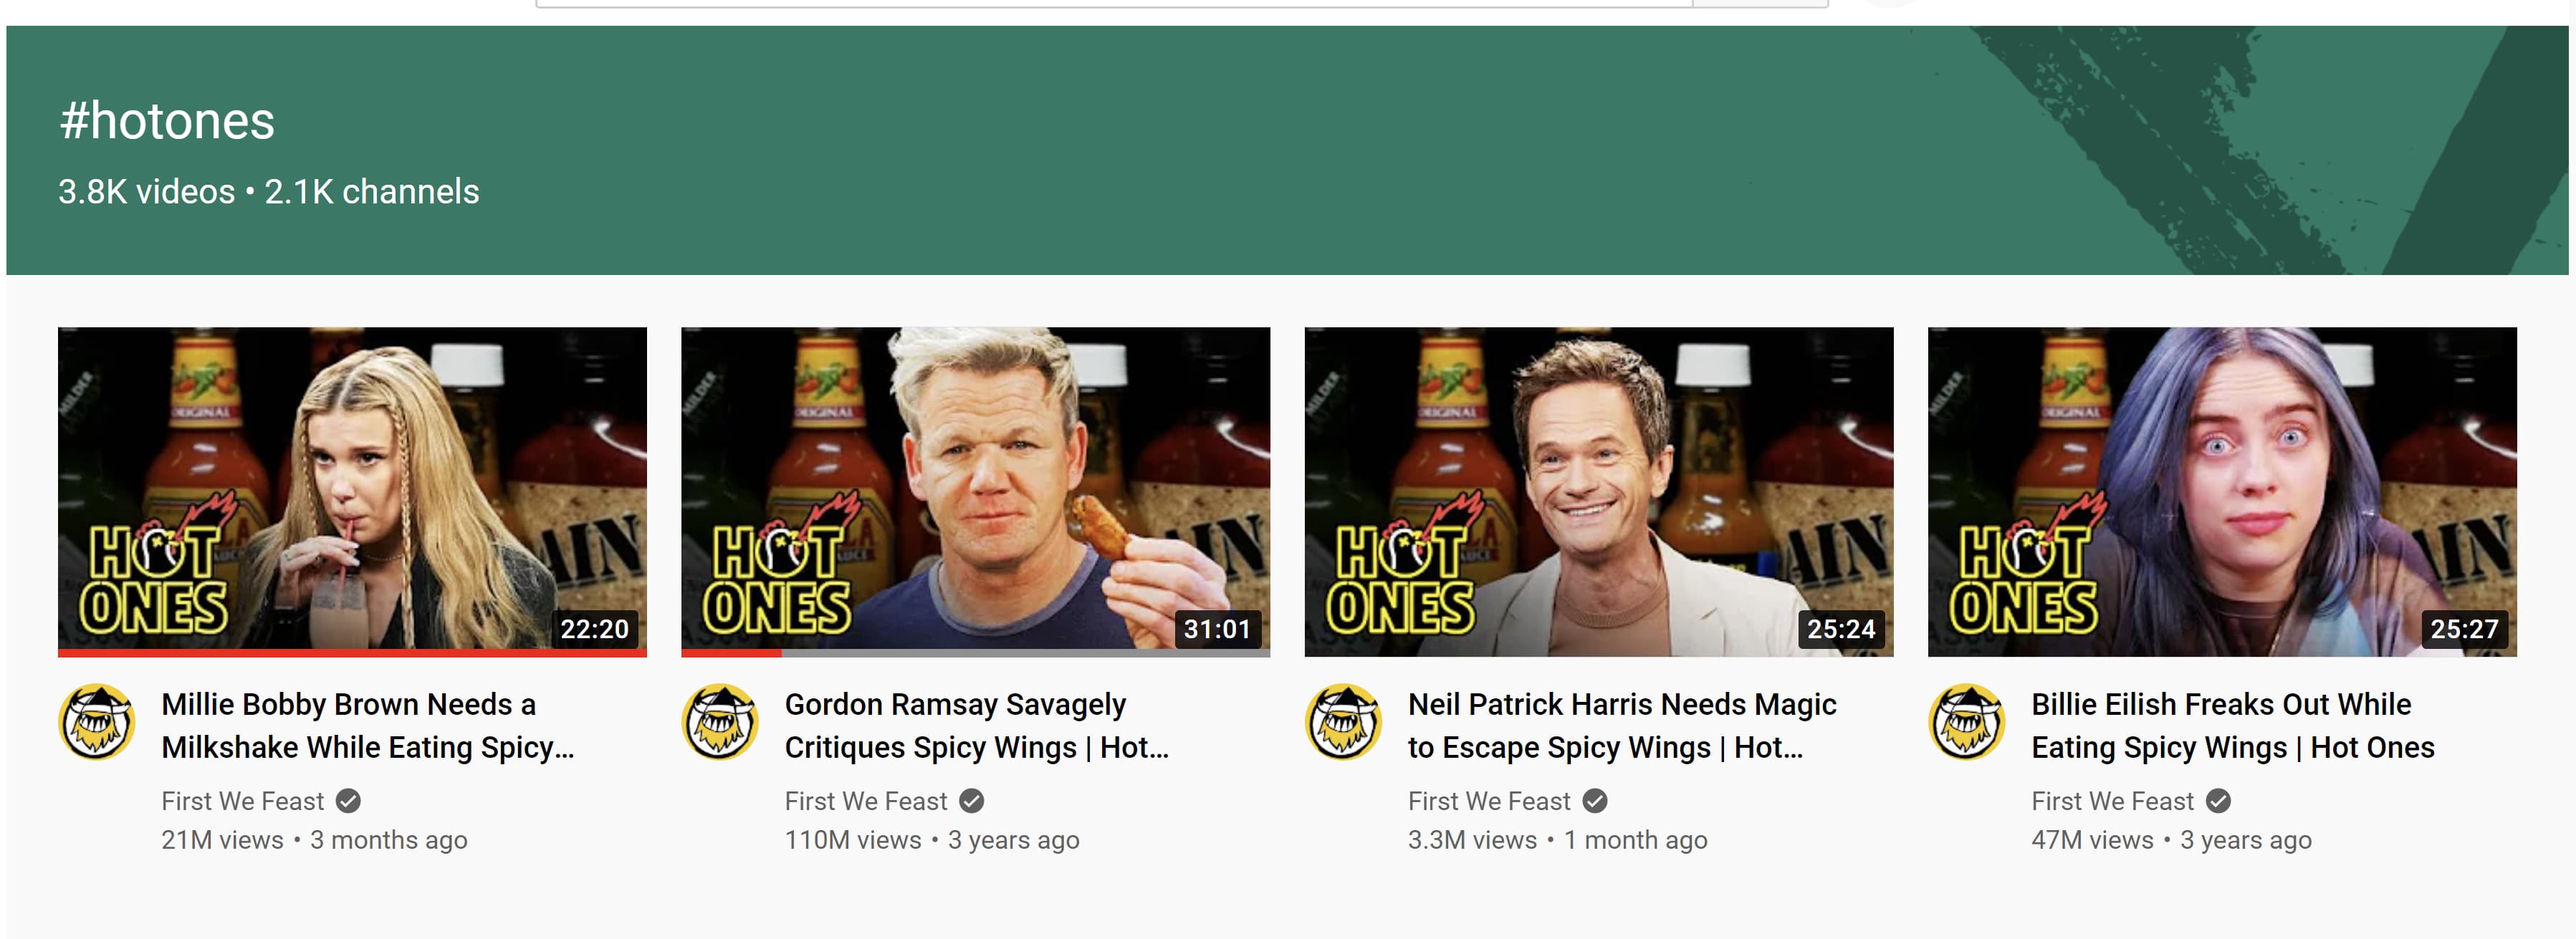 The YouTube hashtag #hotones takes users to a page of videos that use the hashtag